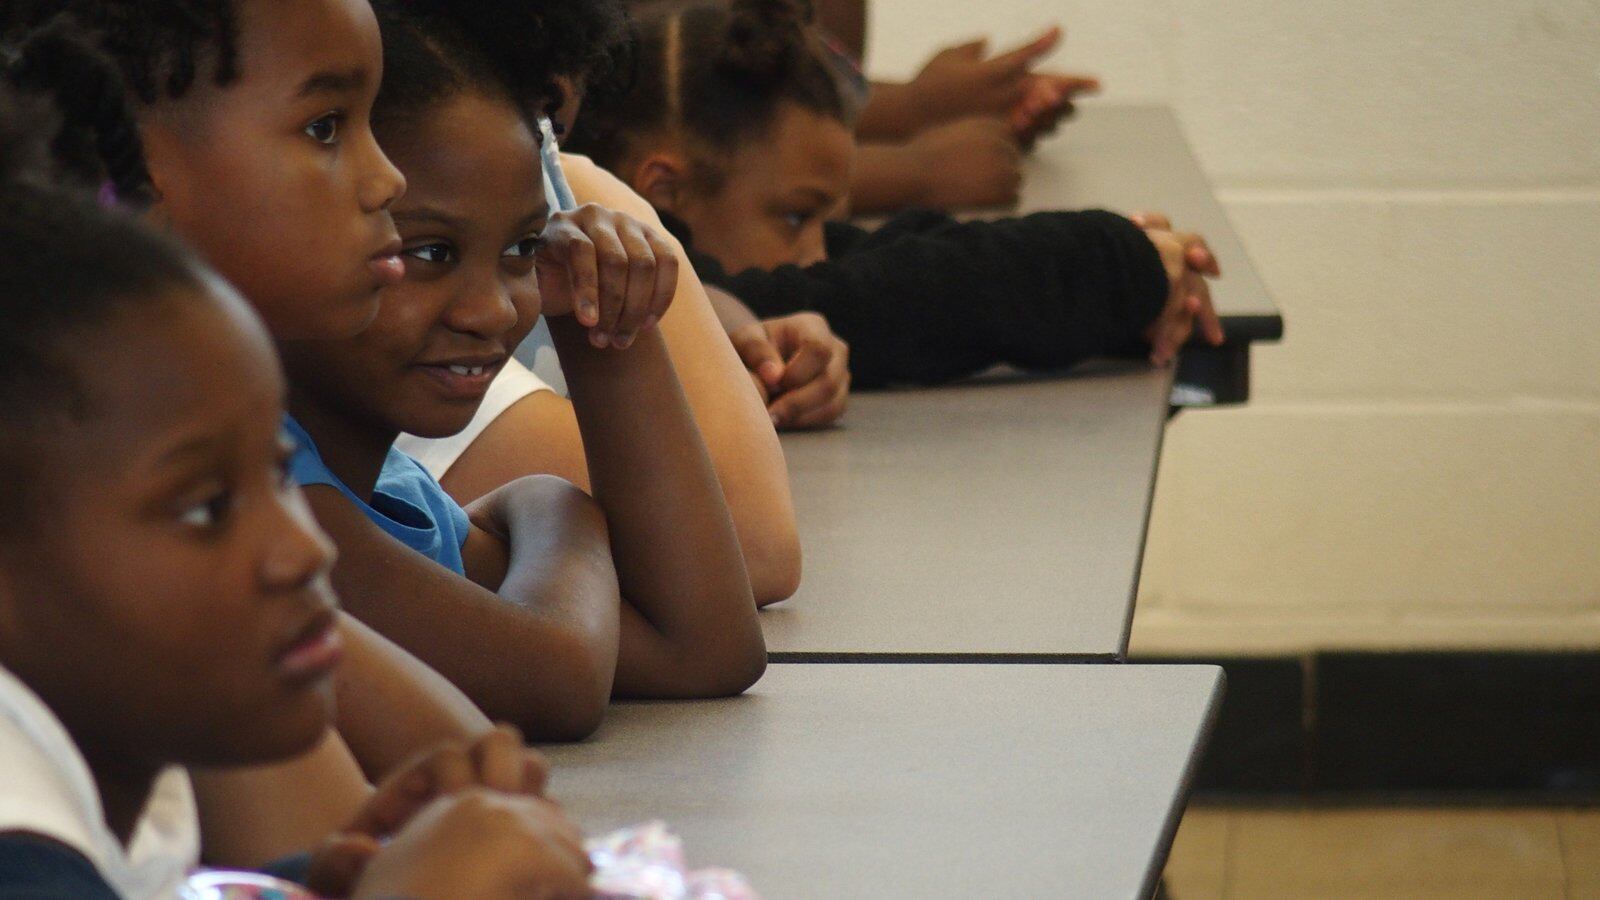 Students at Willow Oaks Elementary School in Memphis watch a performance facilitated by Cazateatro bilingual theater group during Shelby County Schools summer learning academy.